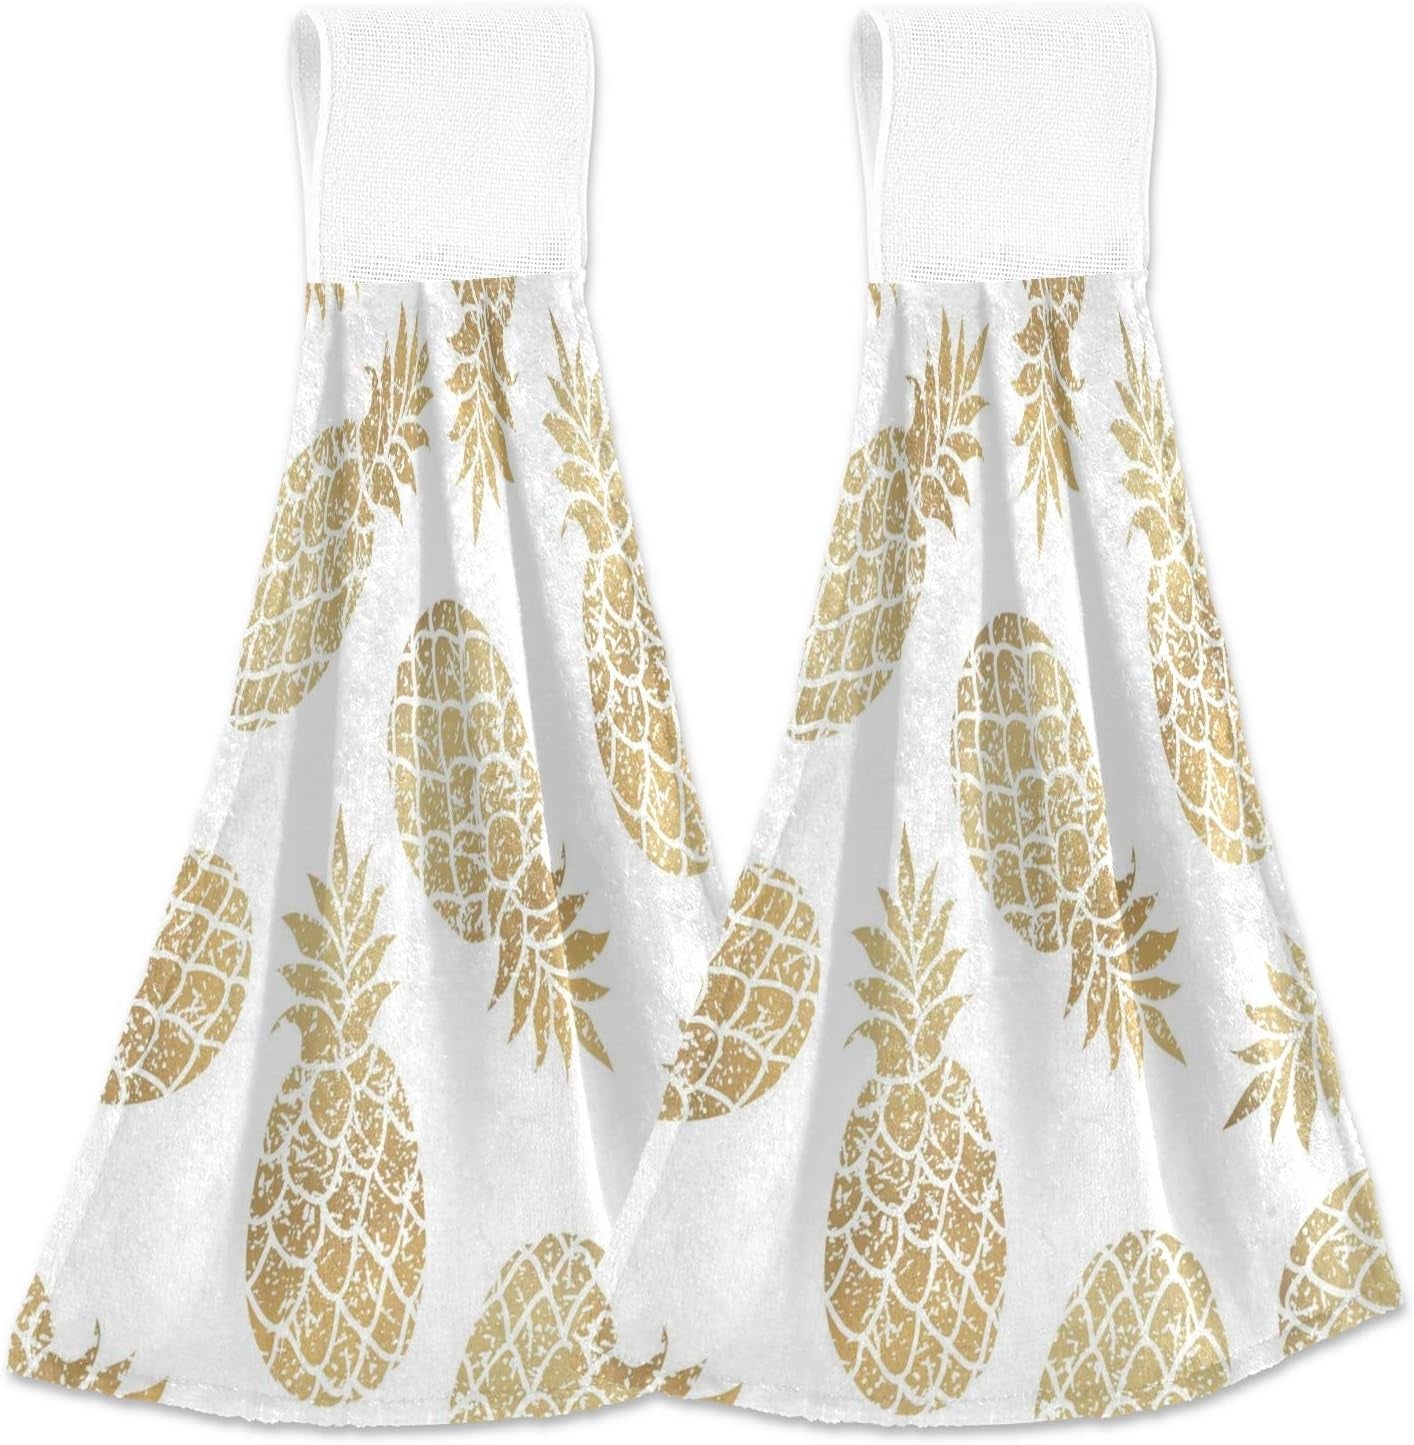 2 Piece Pineapple Pattern Kitchen Towels with Hanging Loop, 12X17 In